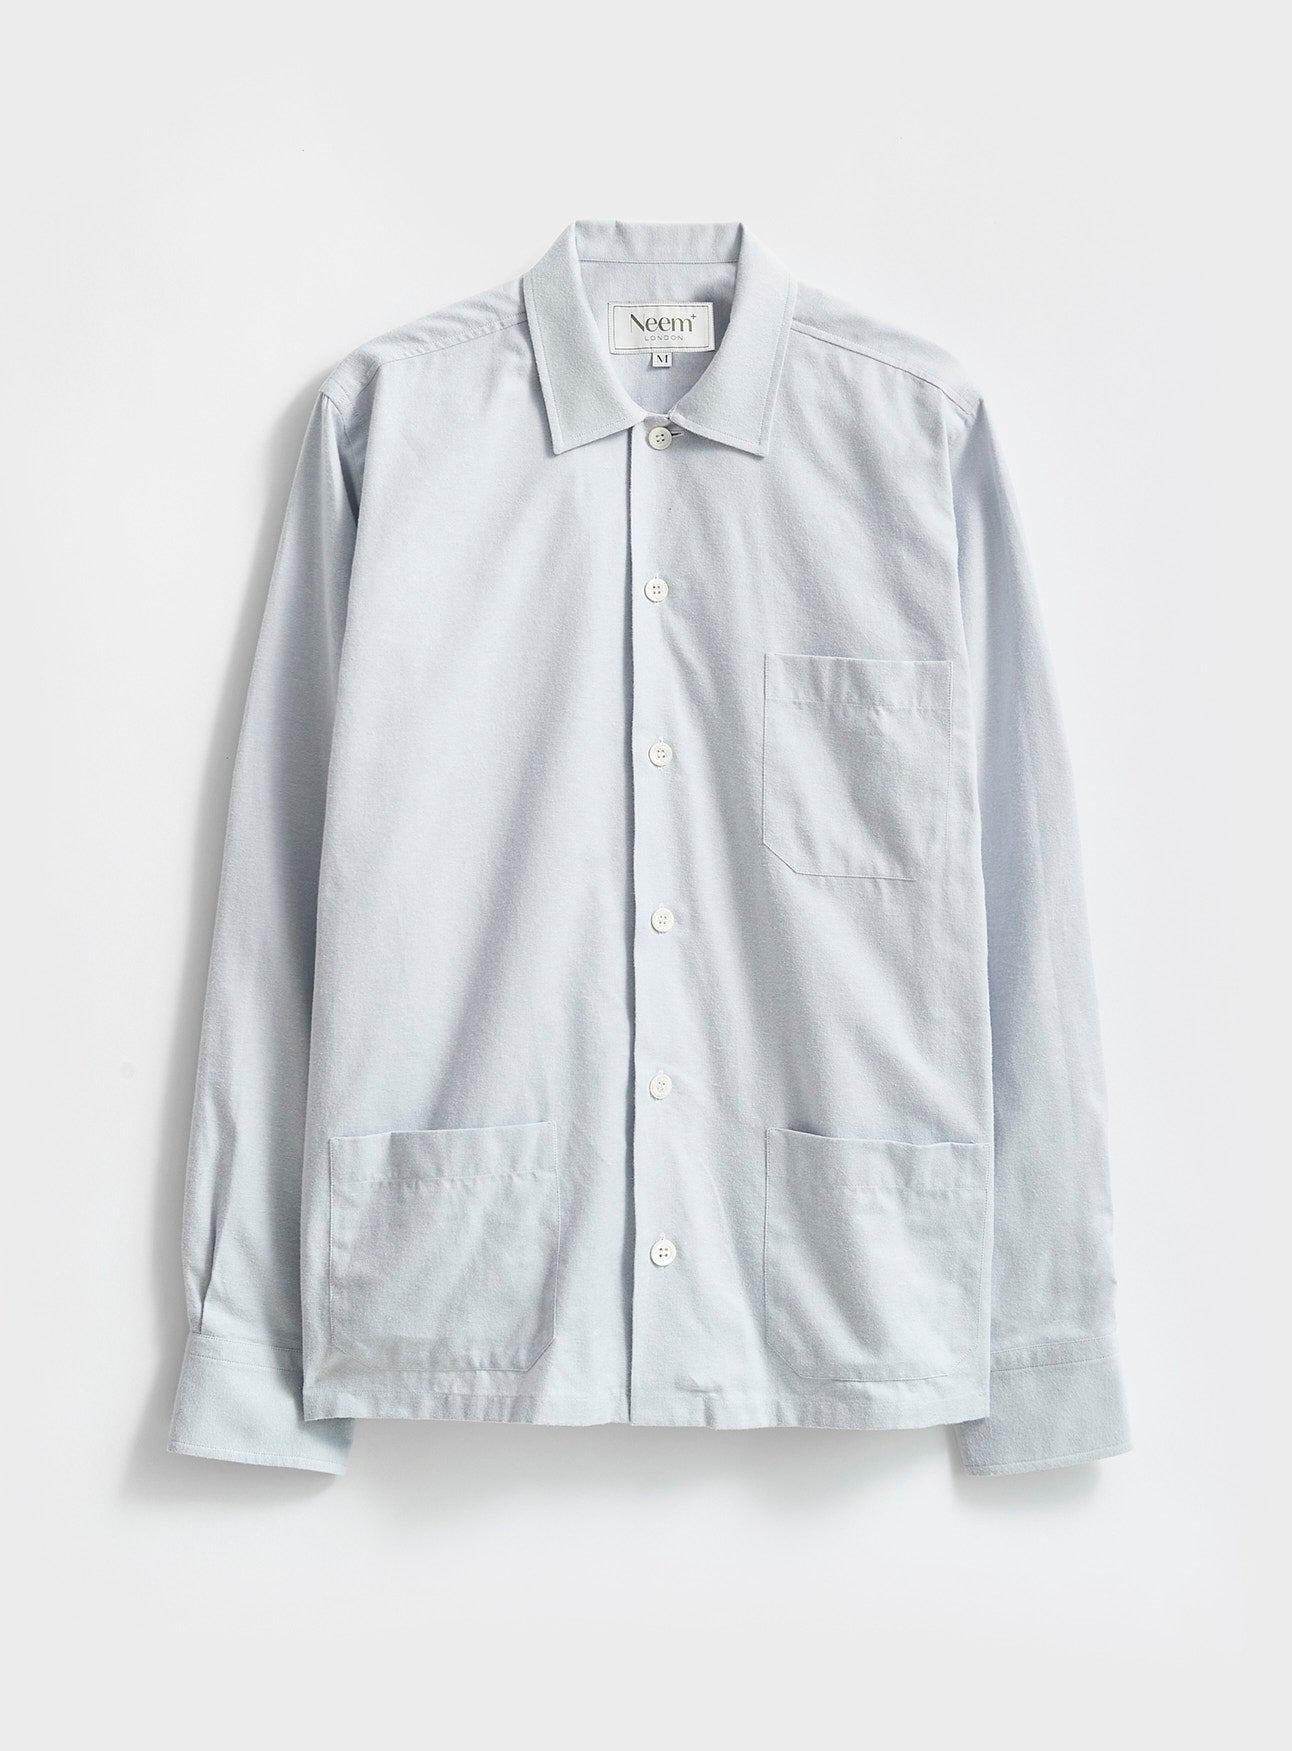 Recycled Sky Oxford Shirt Jacket